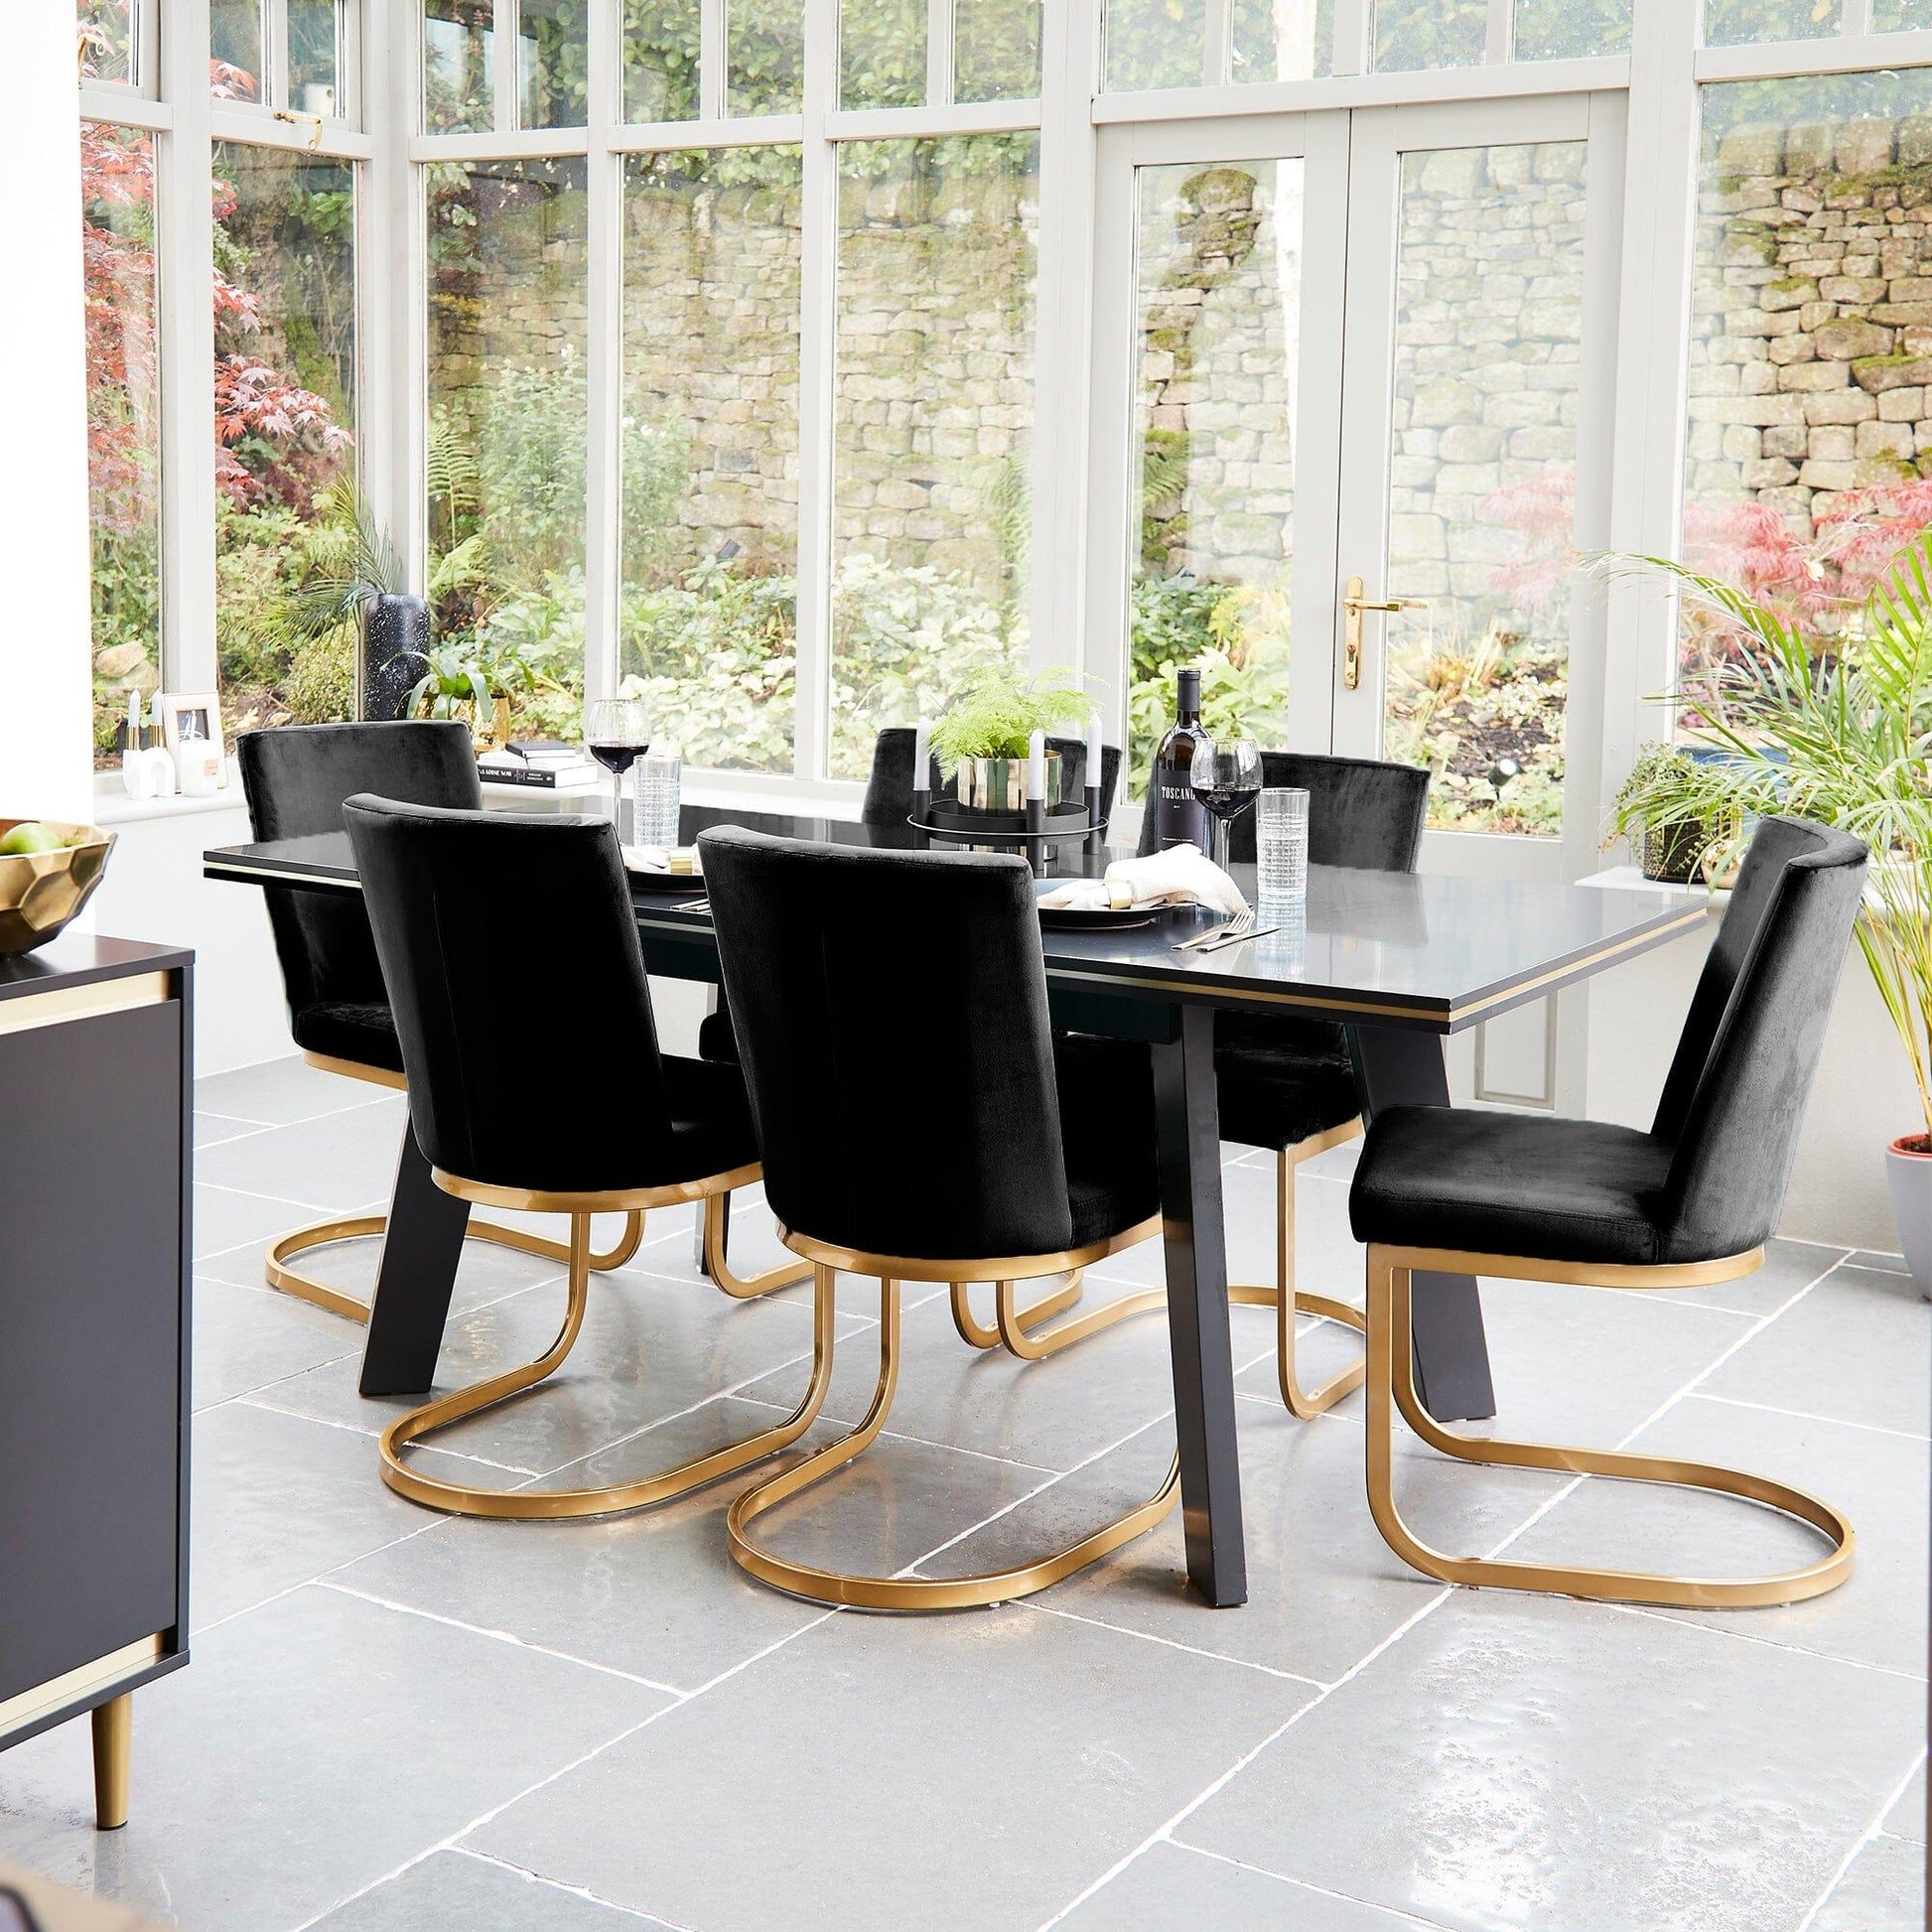 Iliana Black Dining Set with Black Velvet Dining Chairs and Gold Accents - Laura James